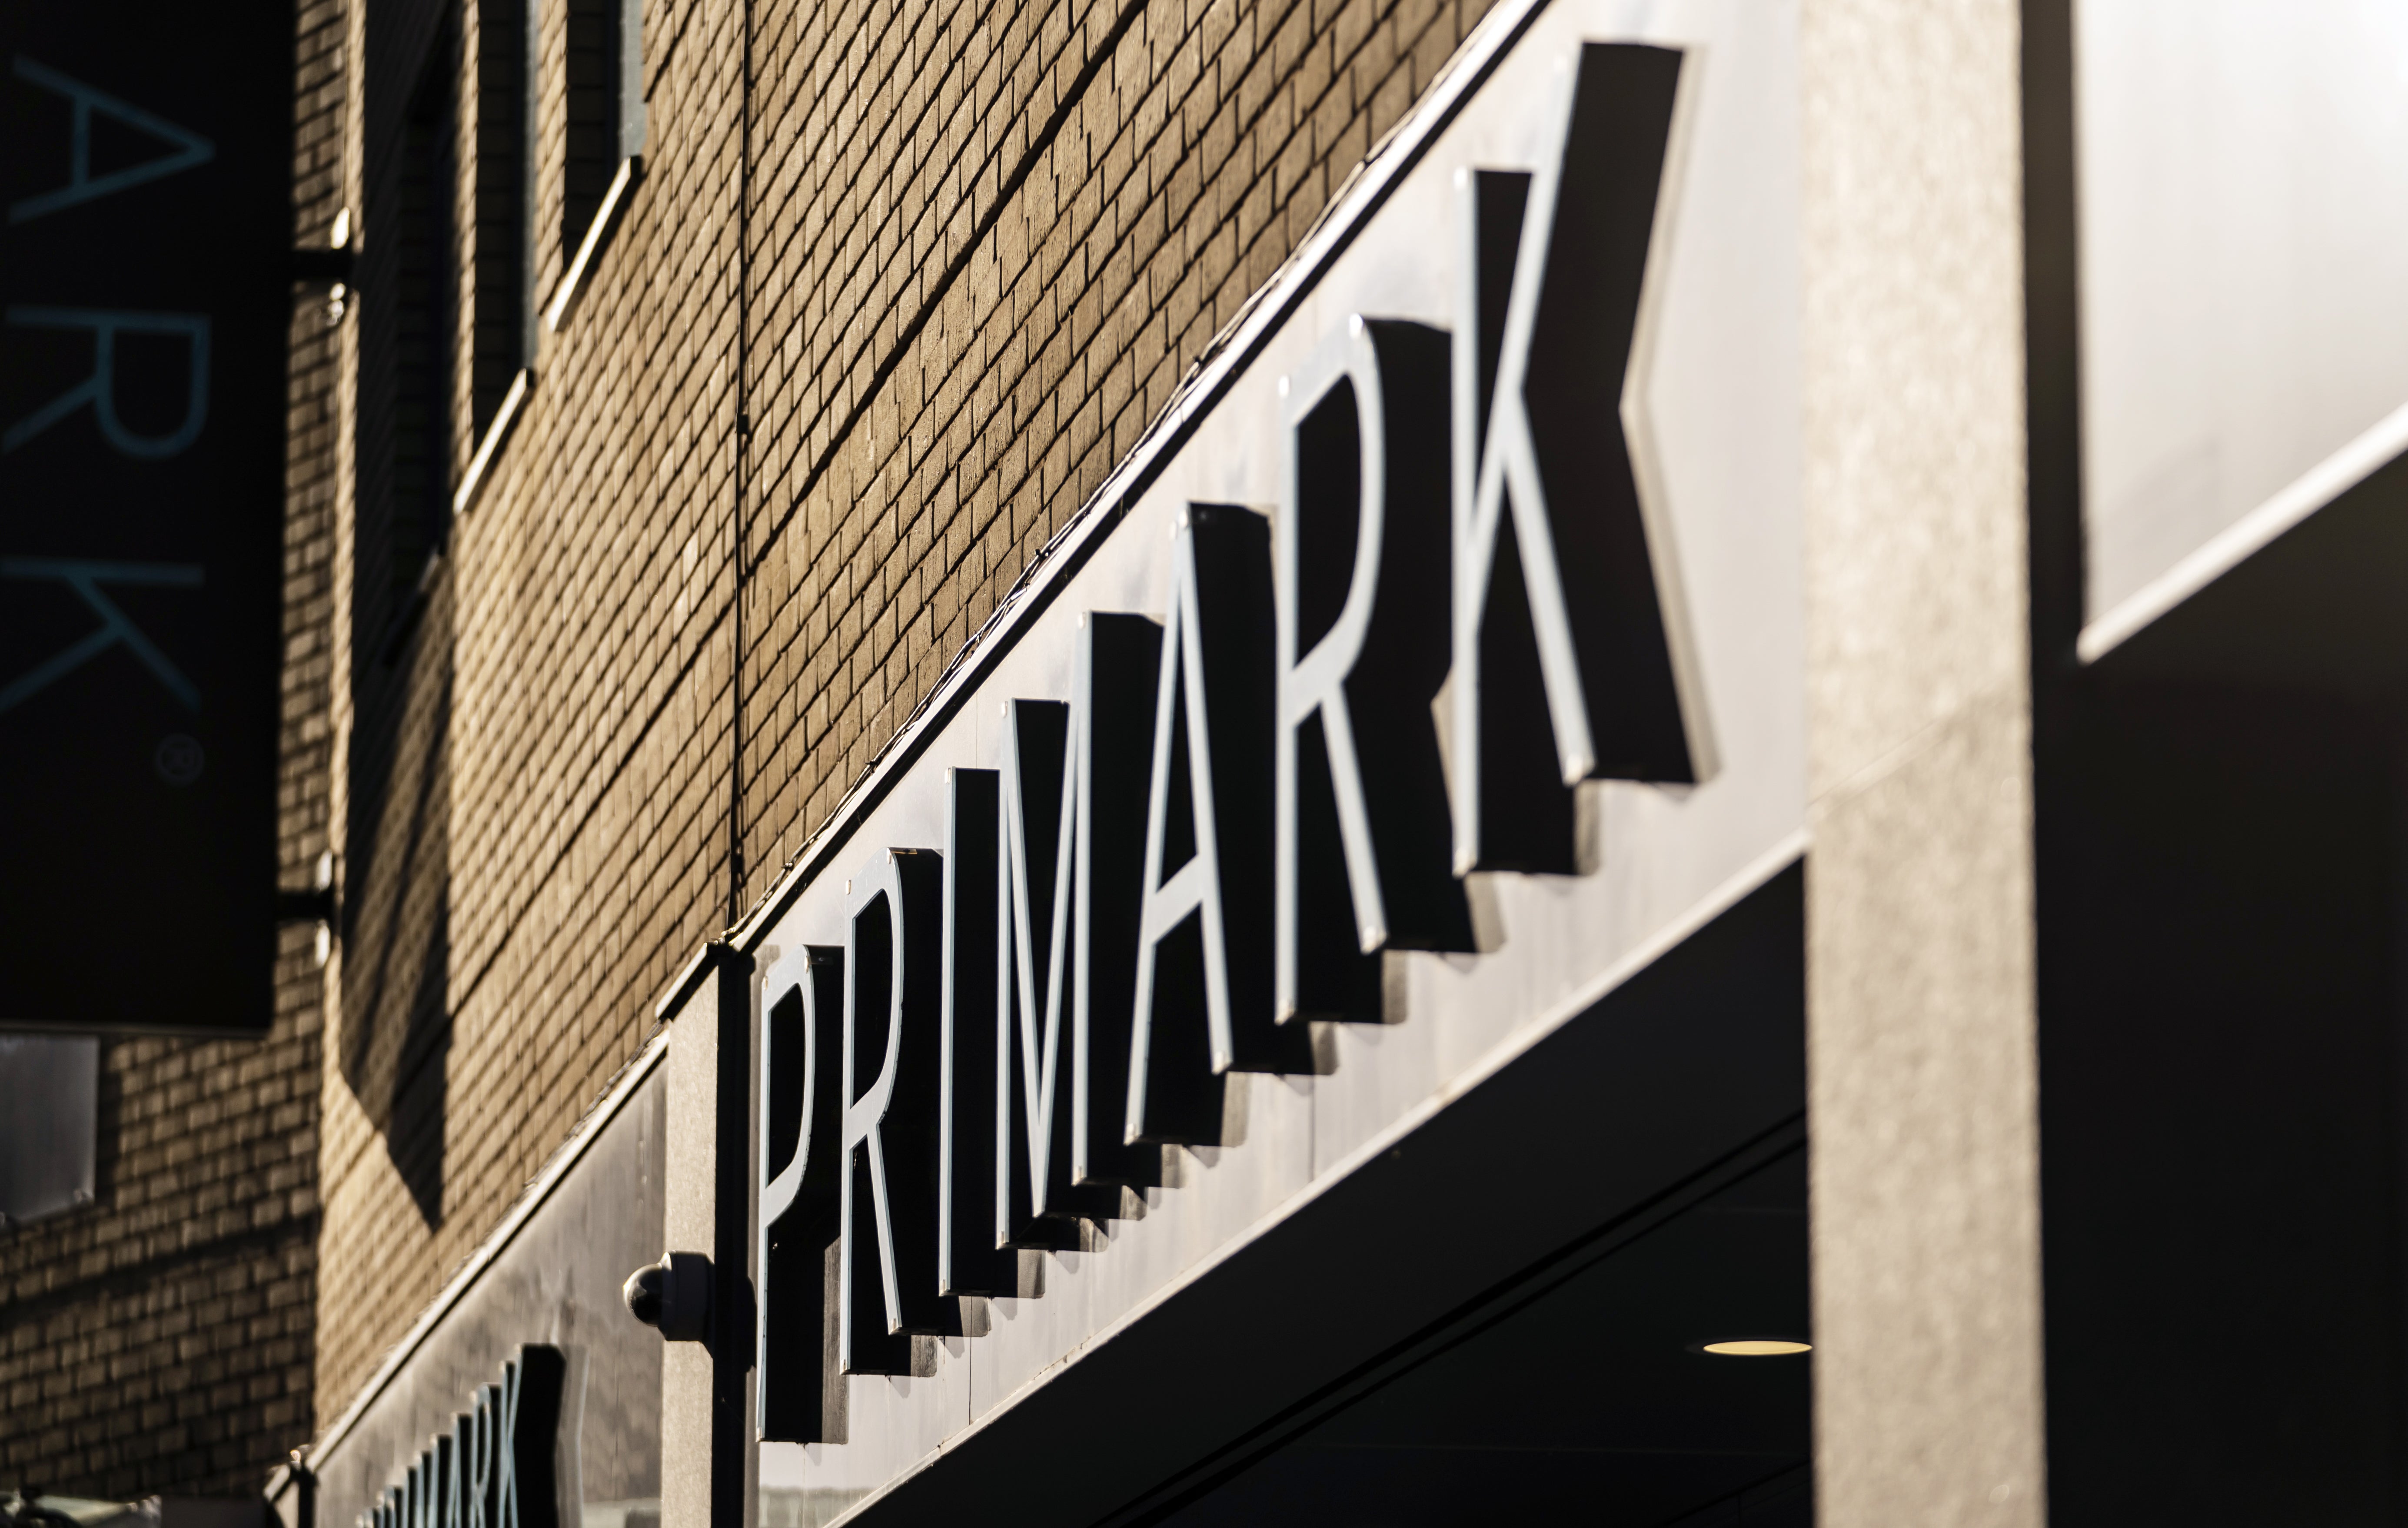 Primark has previously said it will increase prices later this year (Danny Lawson/PA)